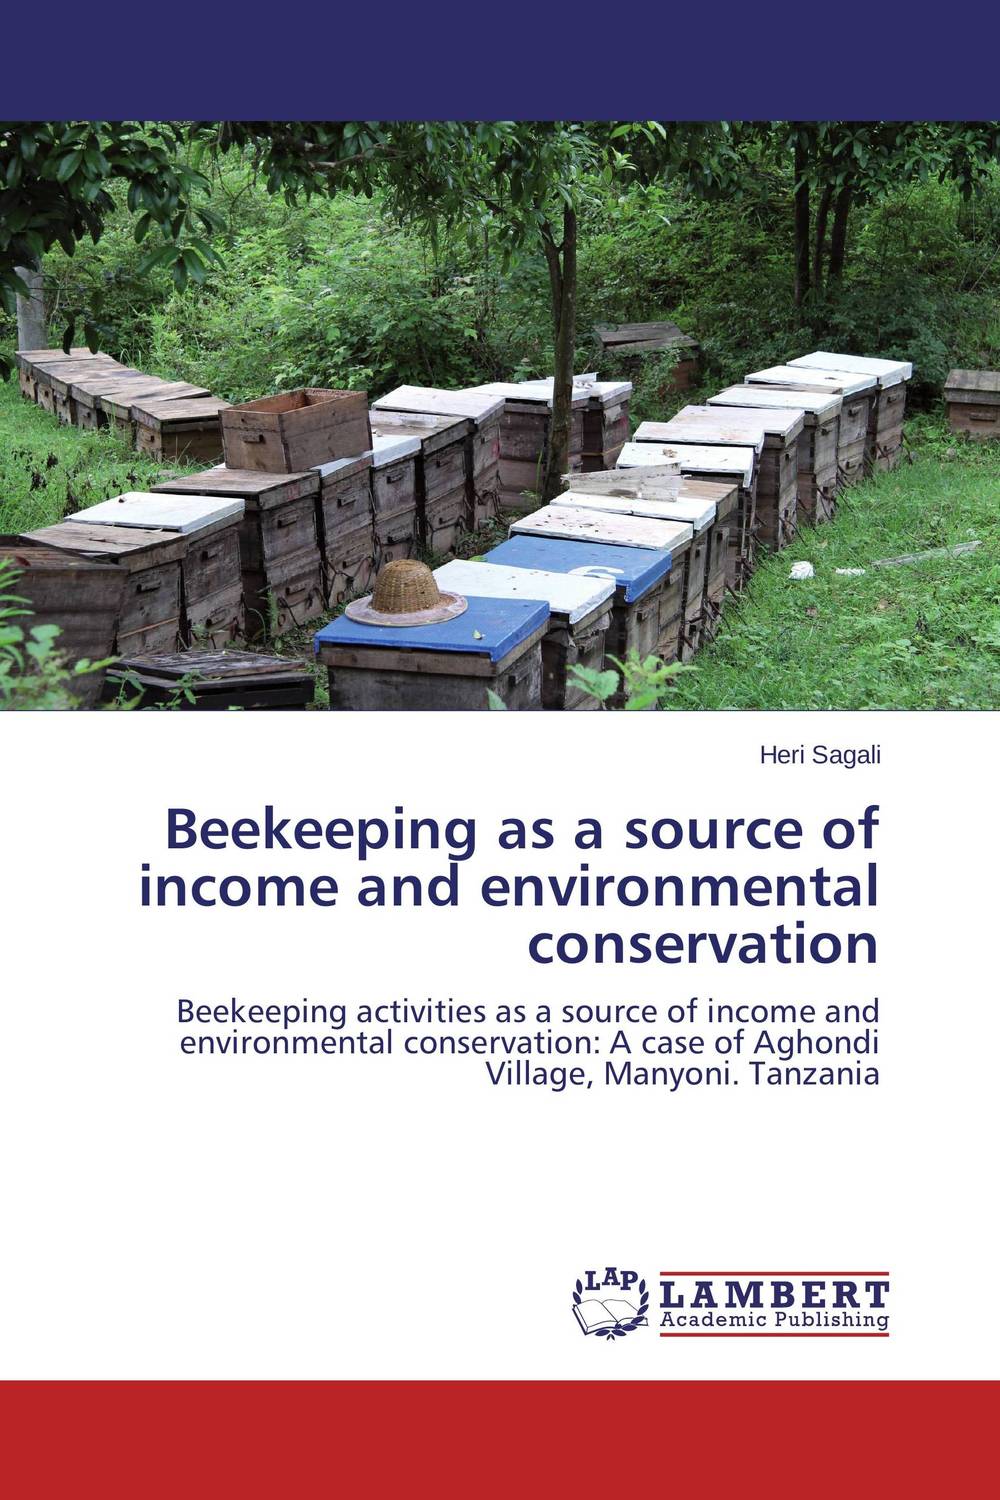 Beekeeping as a source of income and environmental conservation